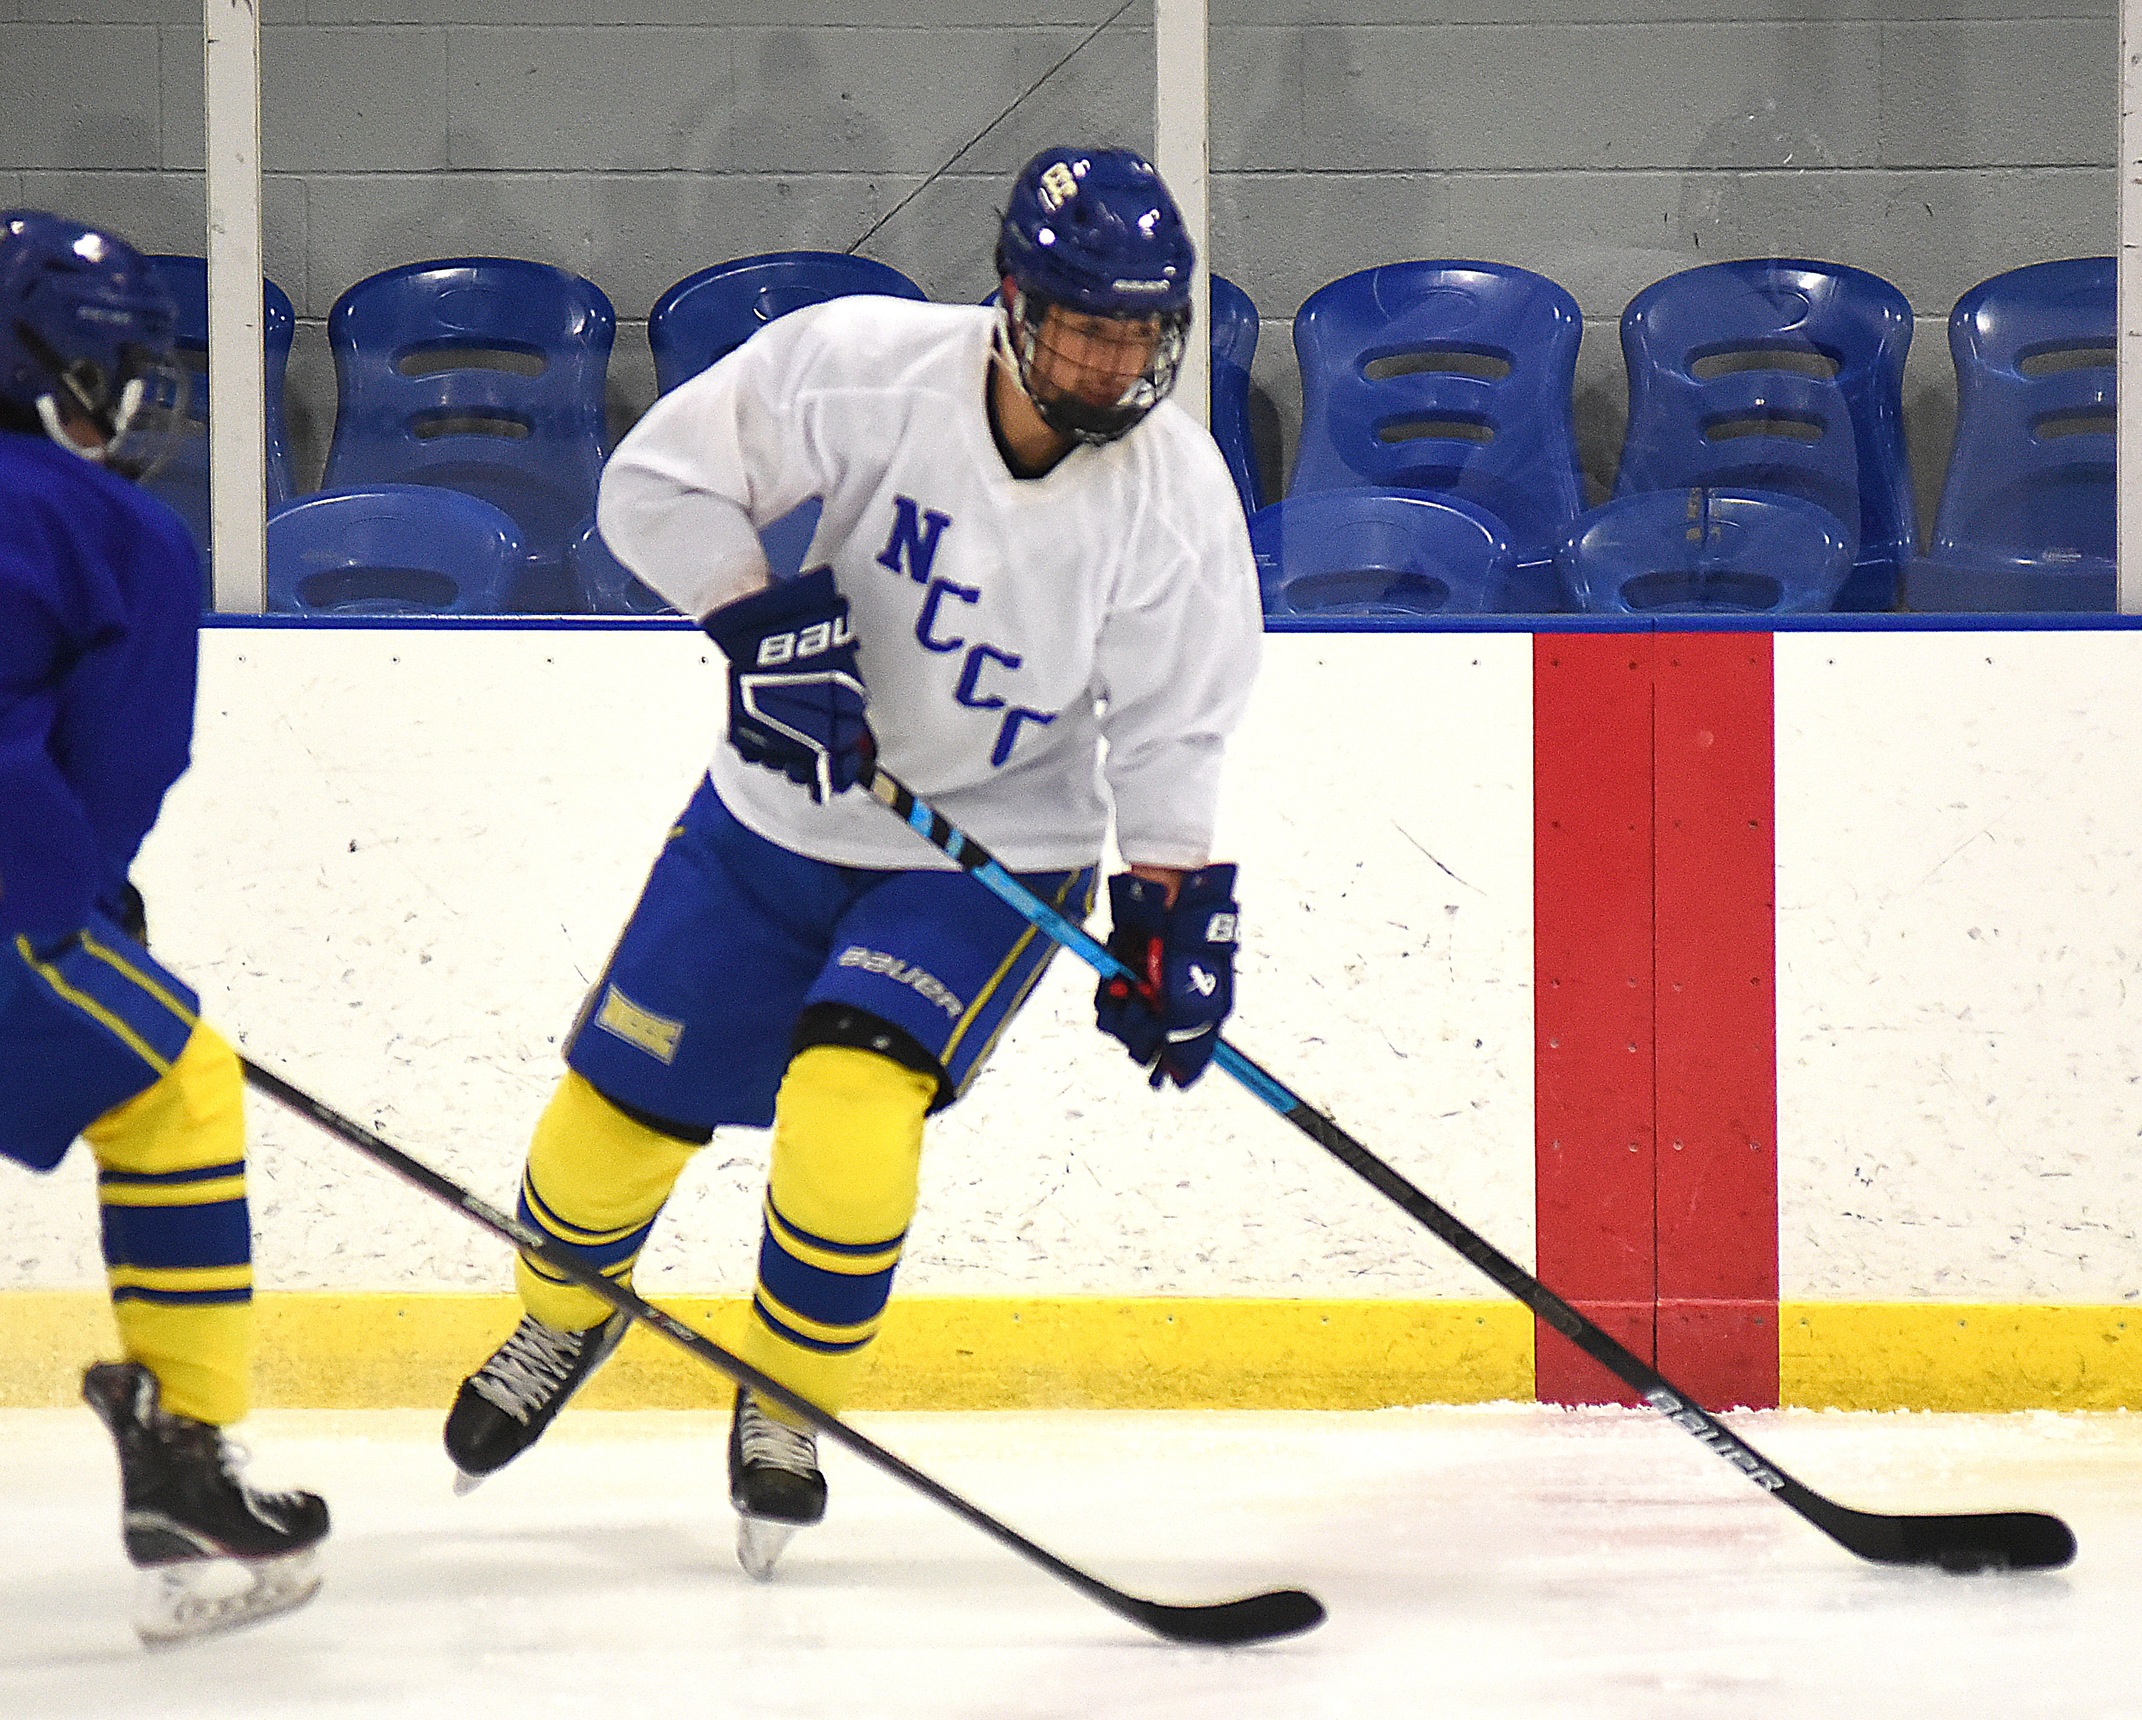 NCCC falls in UNYCHL Tier 1 title game